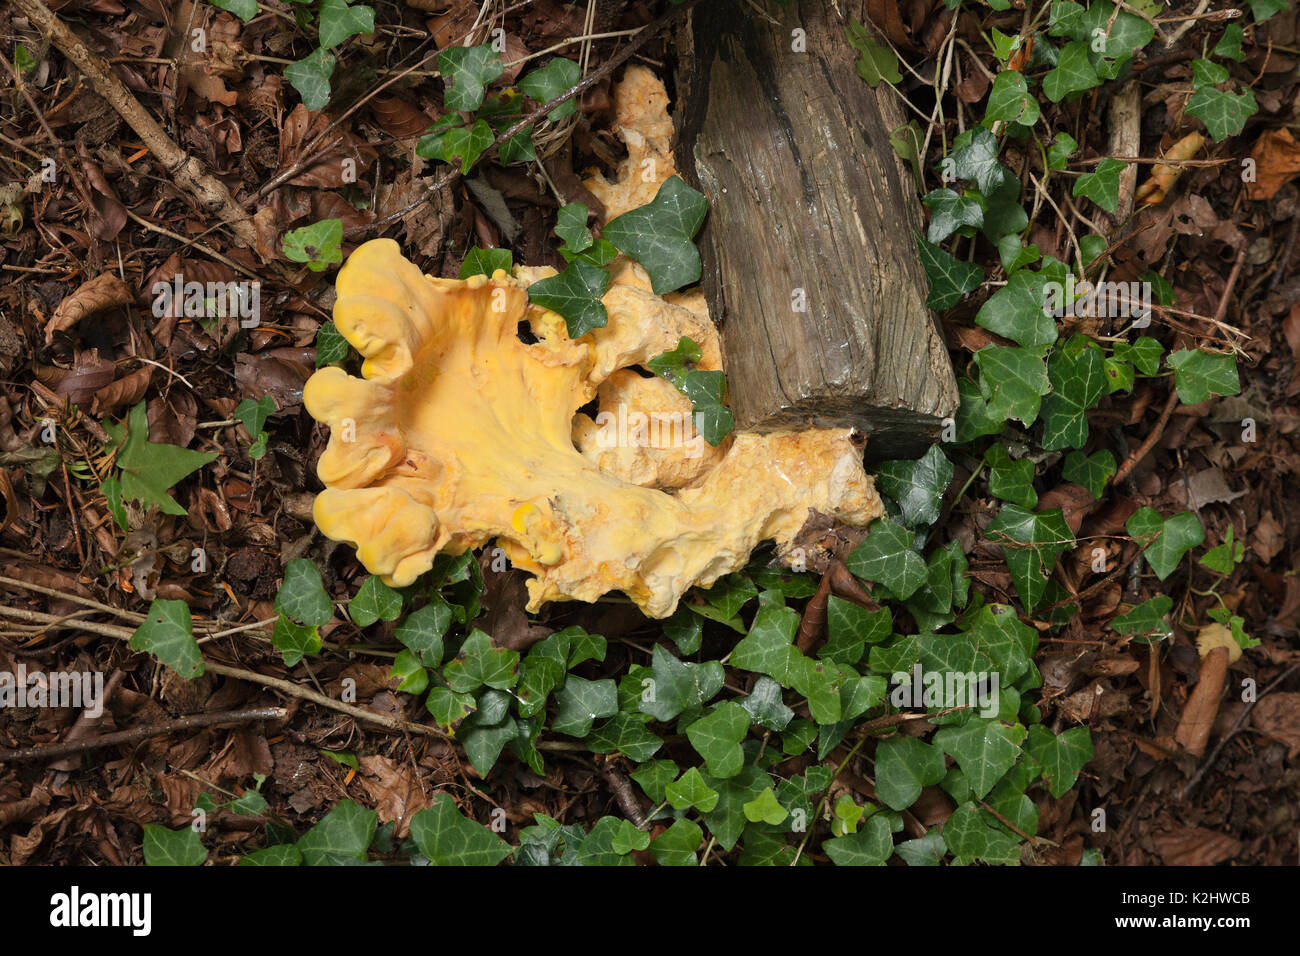 Yellow Brain fungus, Tremella mesenterica (common names include yellow brain, golden jelly fungus, yellow trembler, and witches' butter, older example Stock Photo